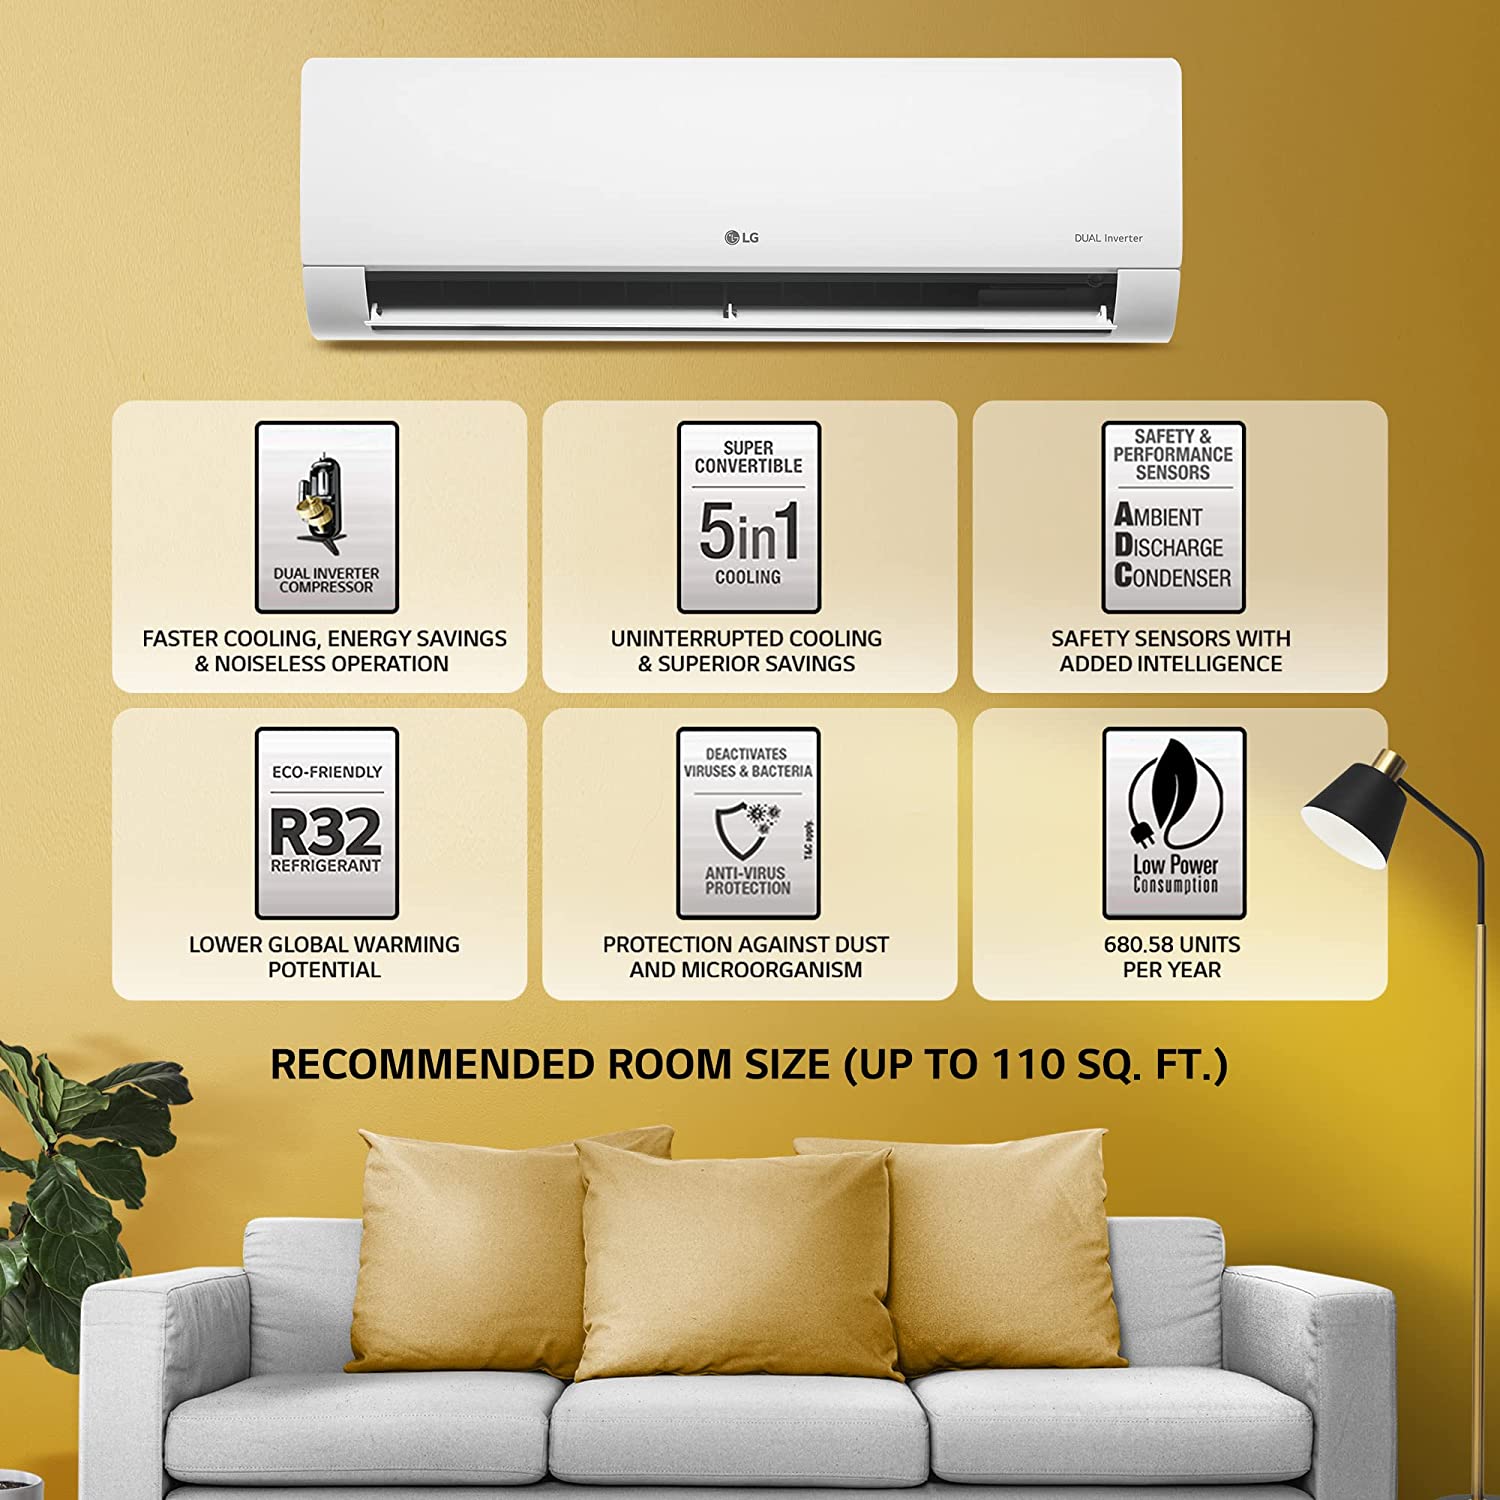 LG 1 Ton 3 Star DUAL Inverter Split AC (Copper, Super Convertible 5-in-1 Cooling, HD Filter with Anti-Virus Protection, 2022 Model, PS-Q12YNXE1, White)